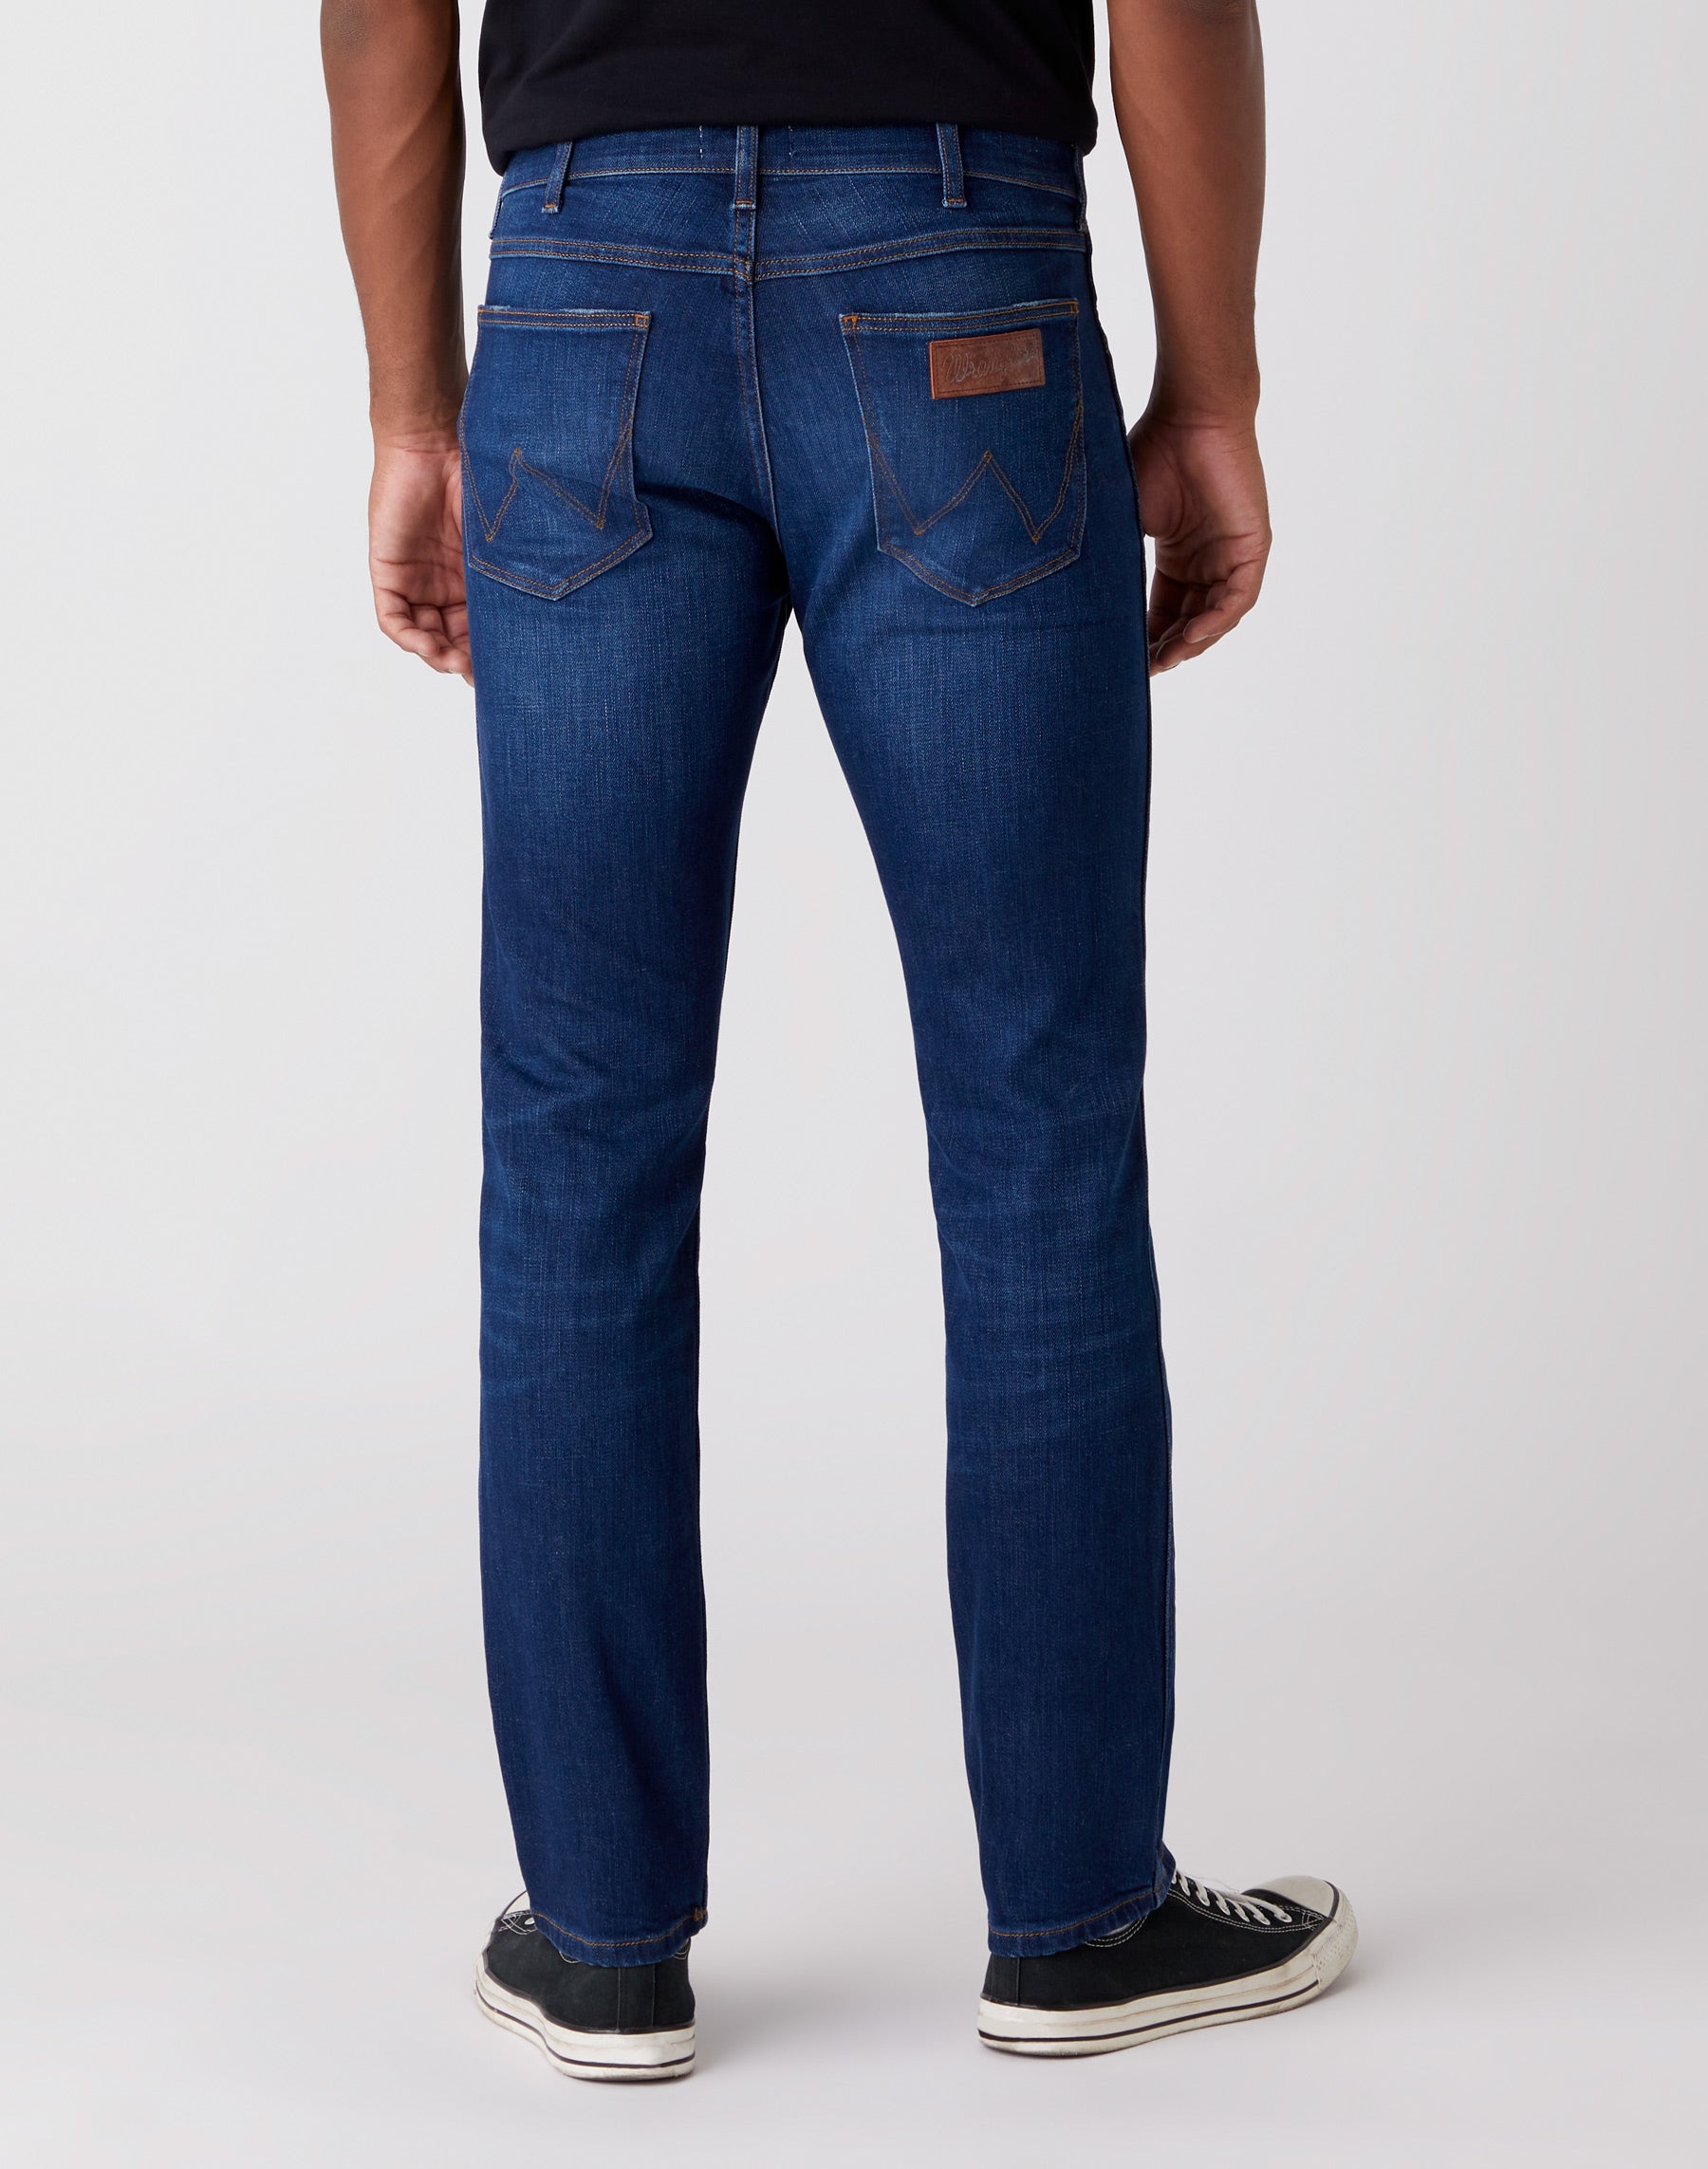 Greensboro Low Stretch in For Real Jeans Wrangler   